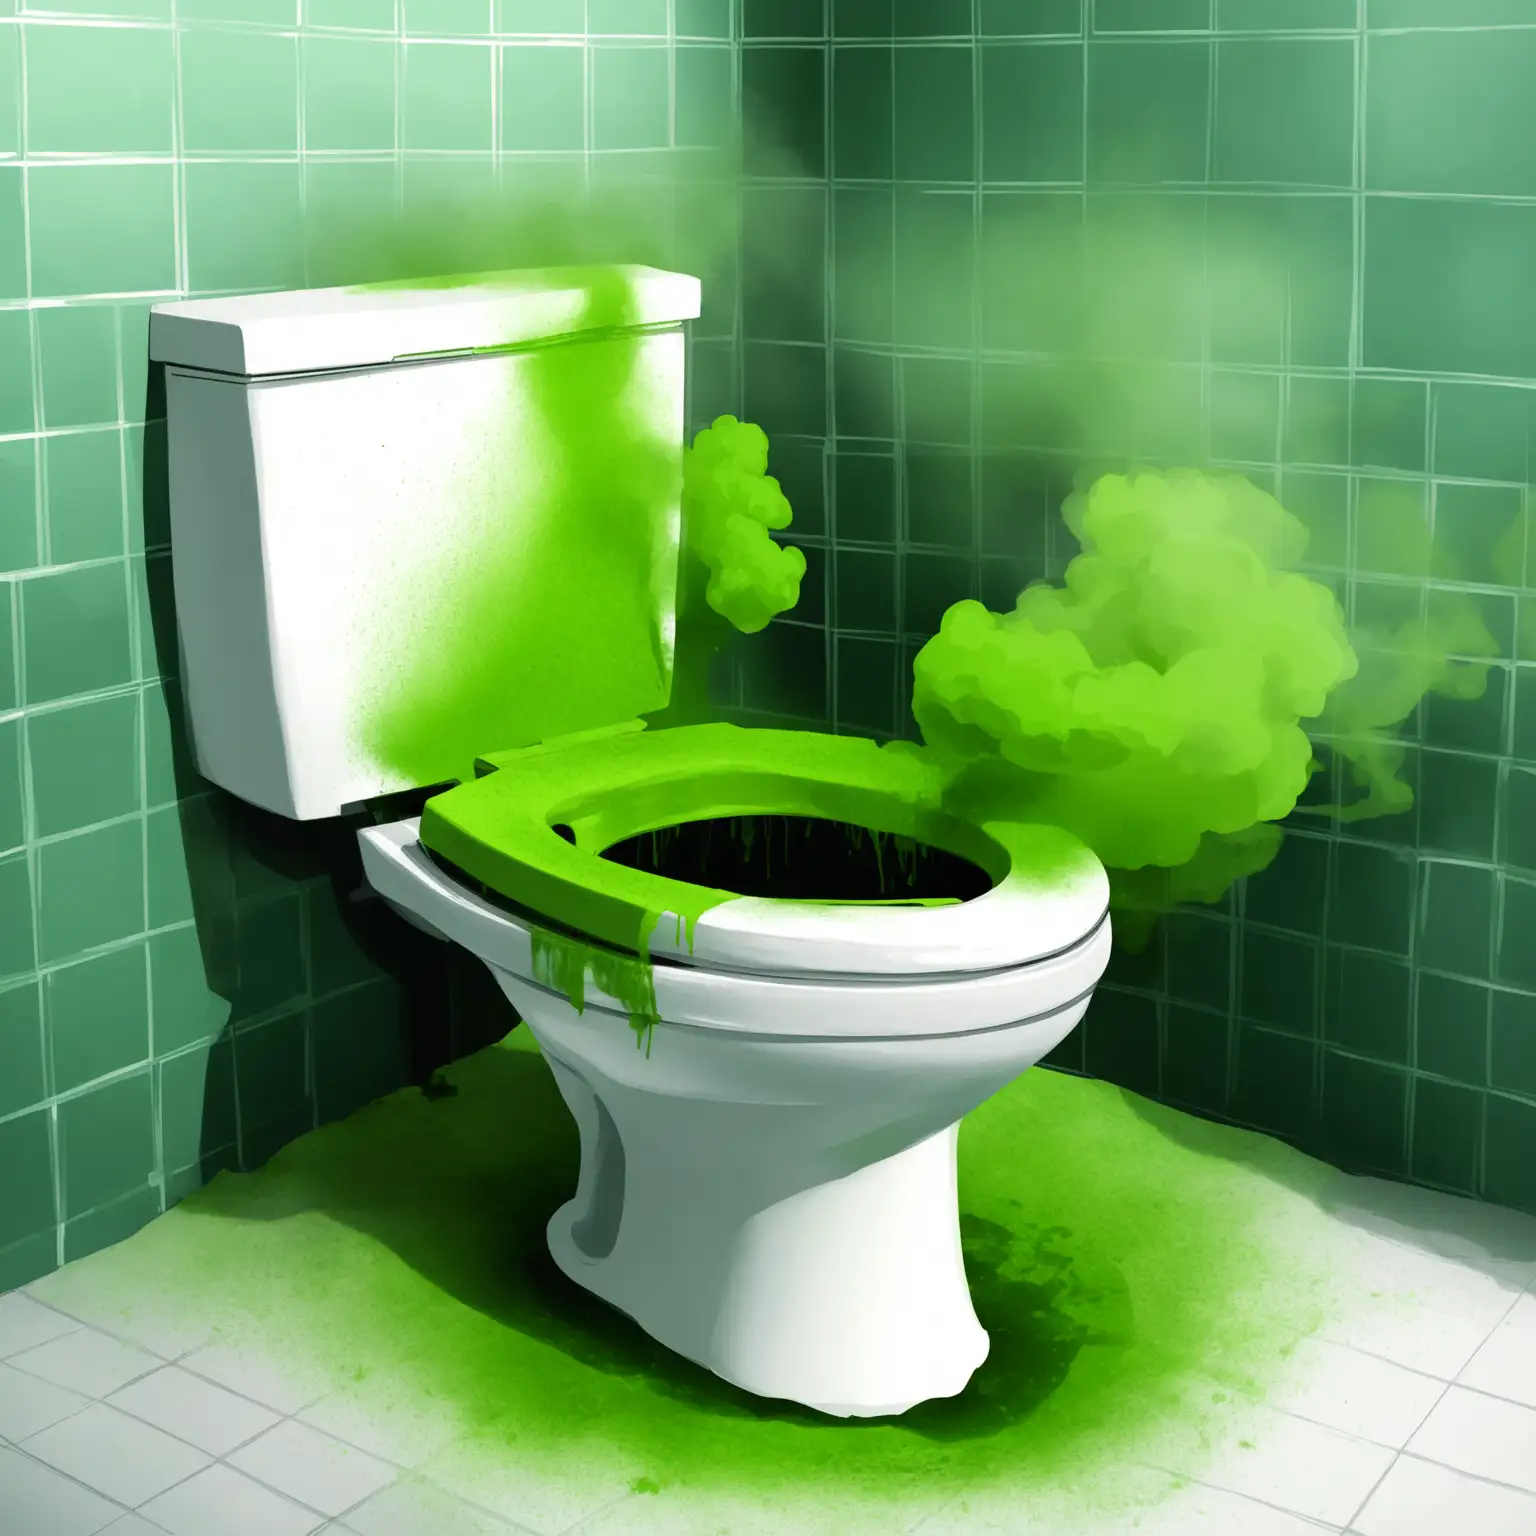 stinky toilet with green fumes smell

